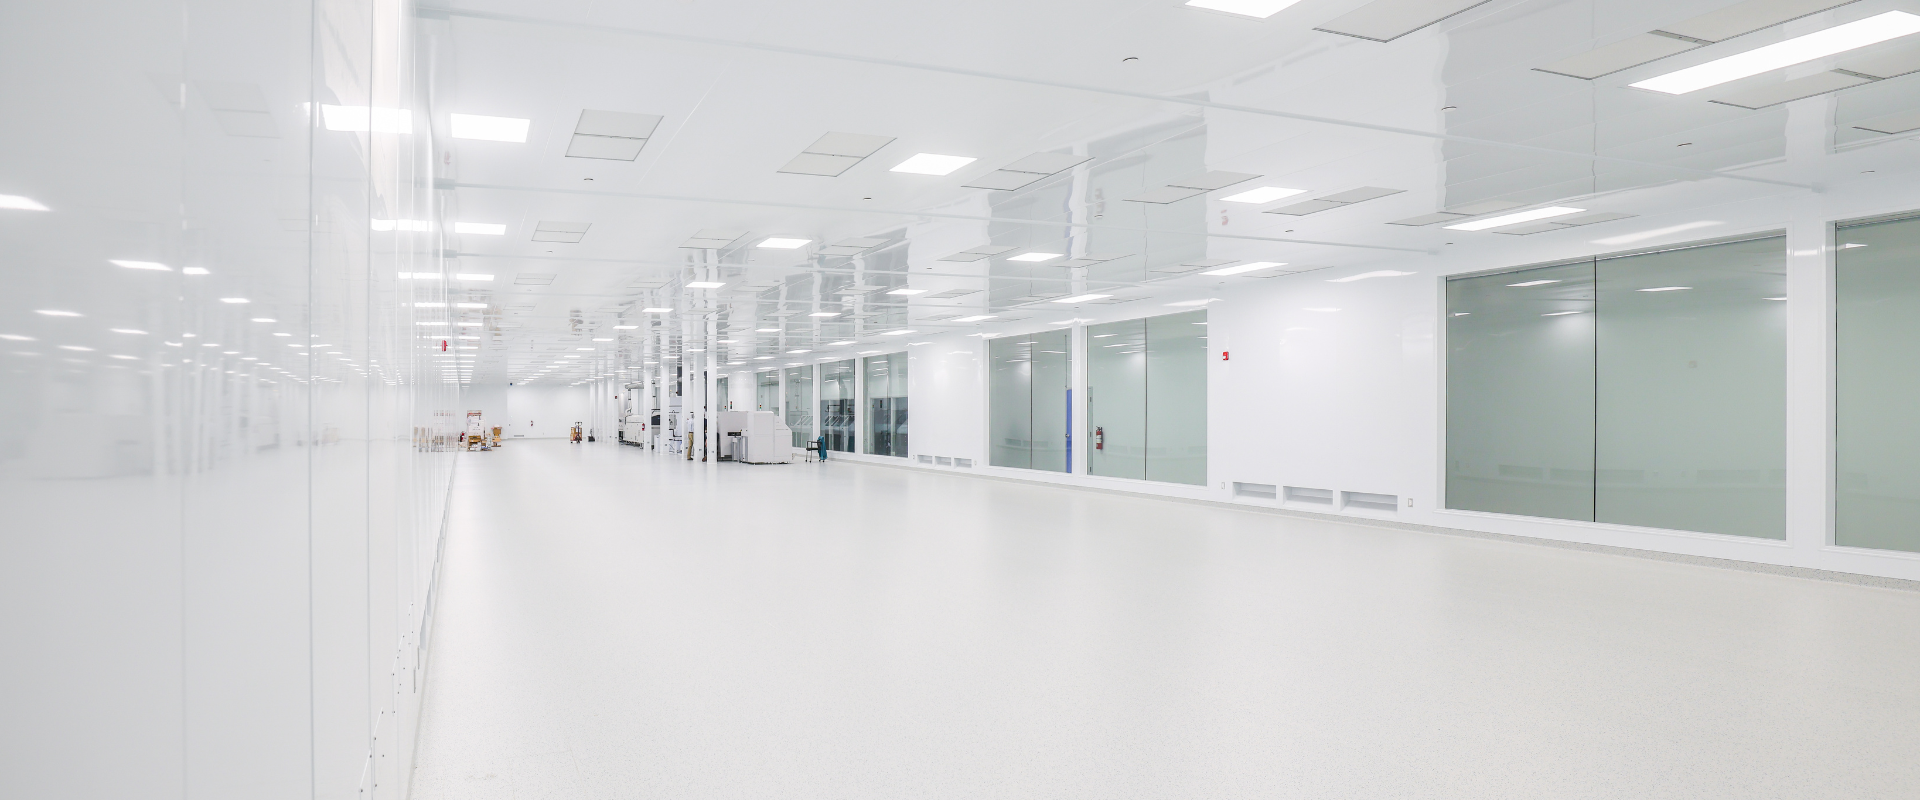 Cleanroom Classifications – Classes 1, 10, 100, 1000, 10000, and 100000 (FS209E)